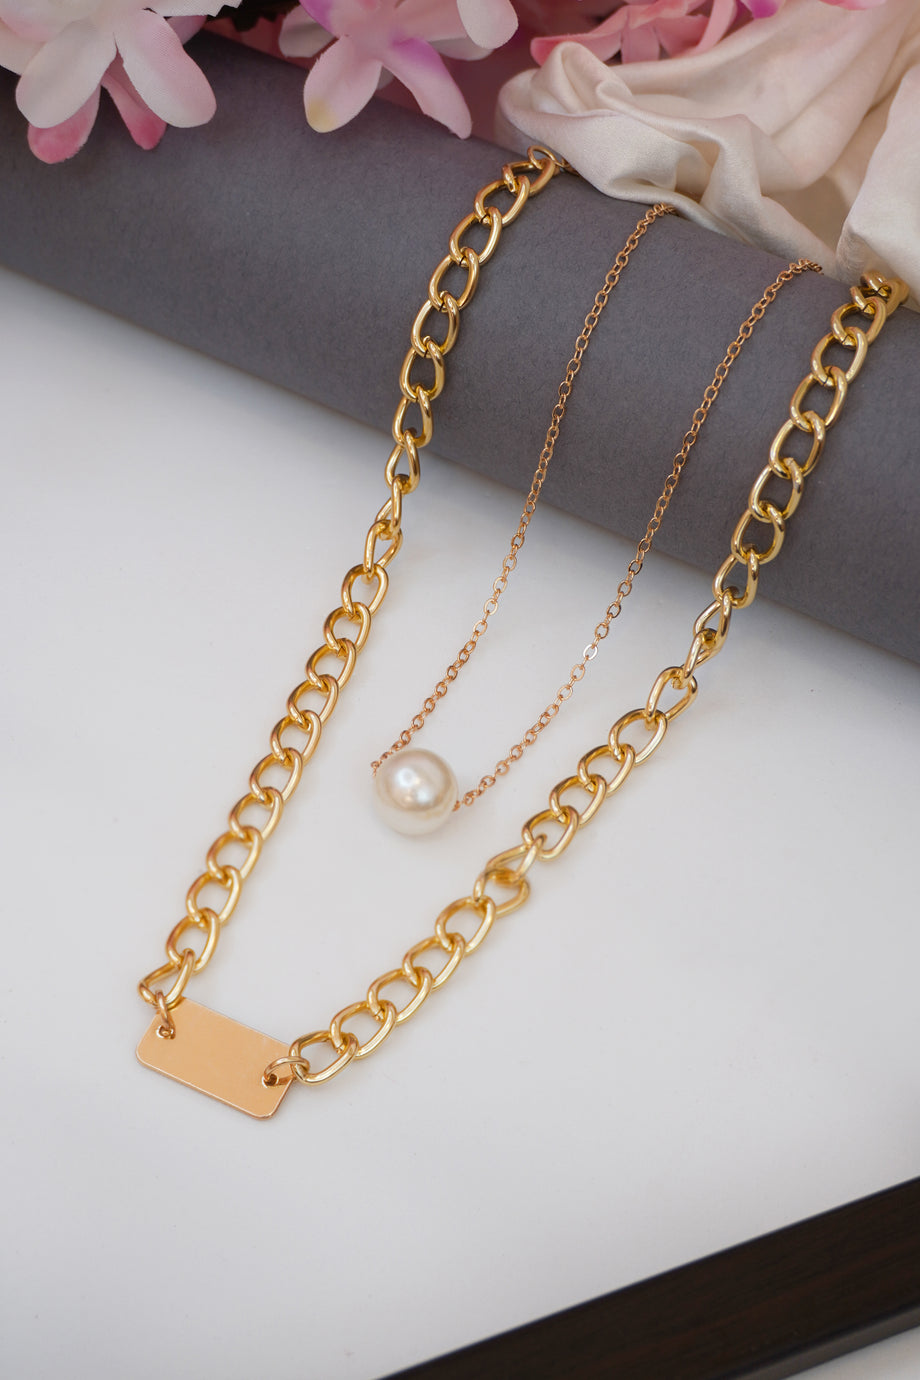 NWT Tory Burch Rose / Tory Gold Logo Pearl Chain Necklace 60271 | eBay